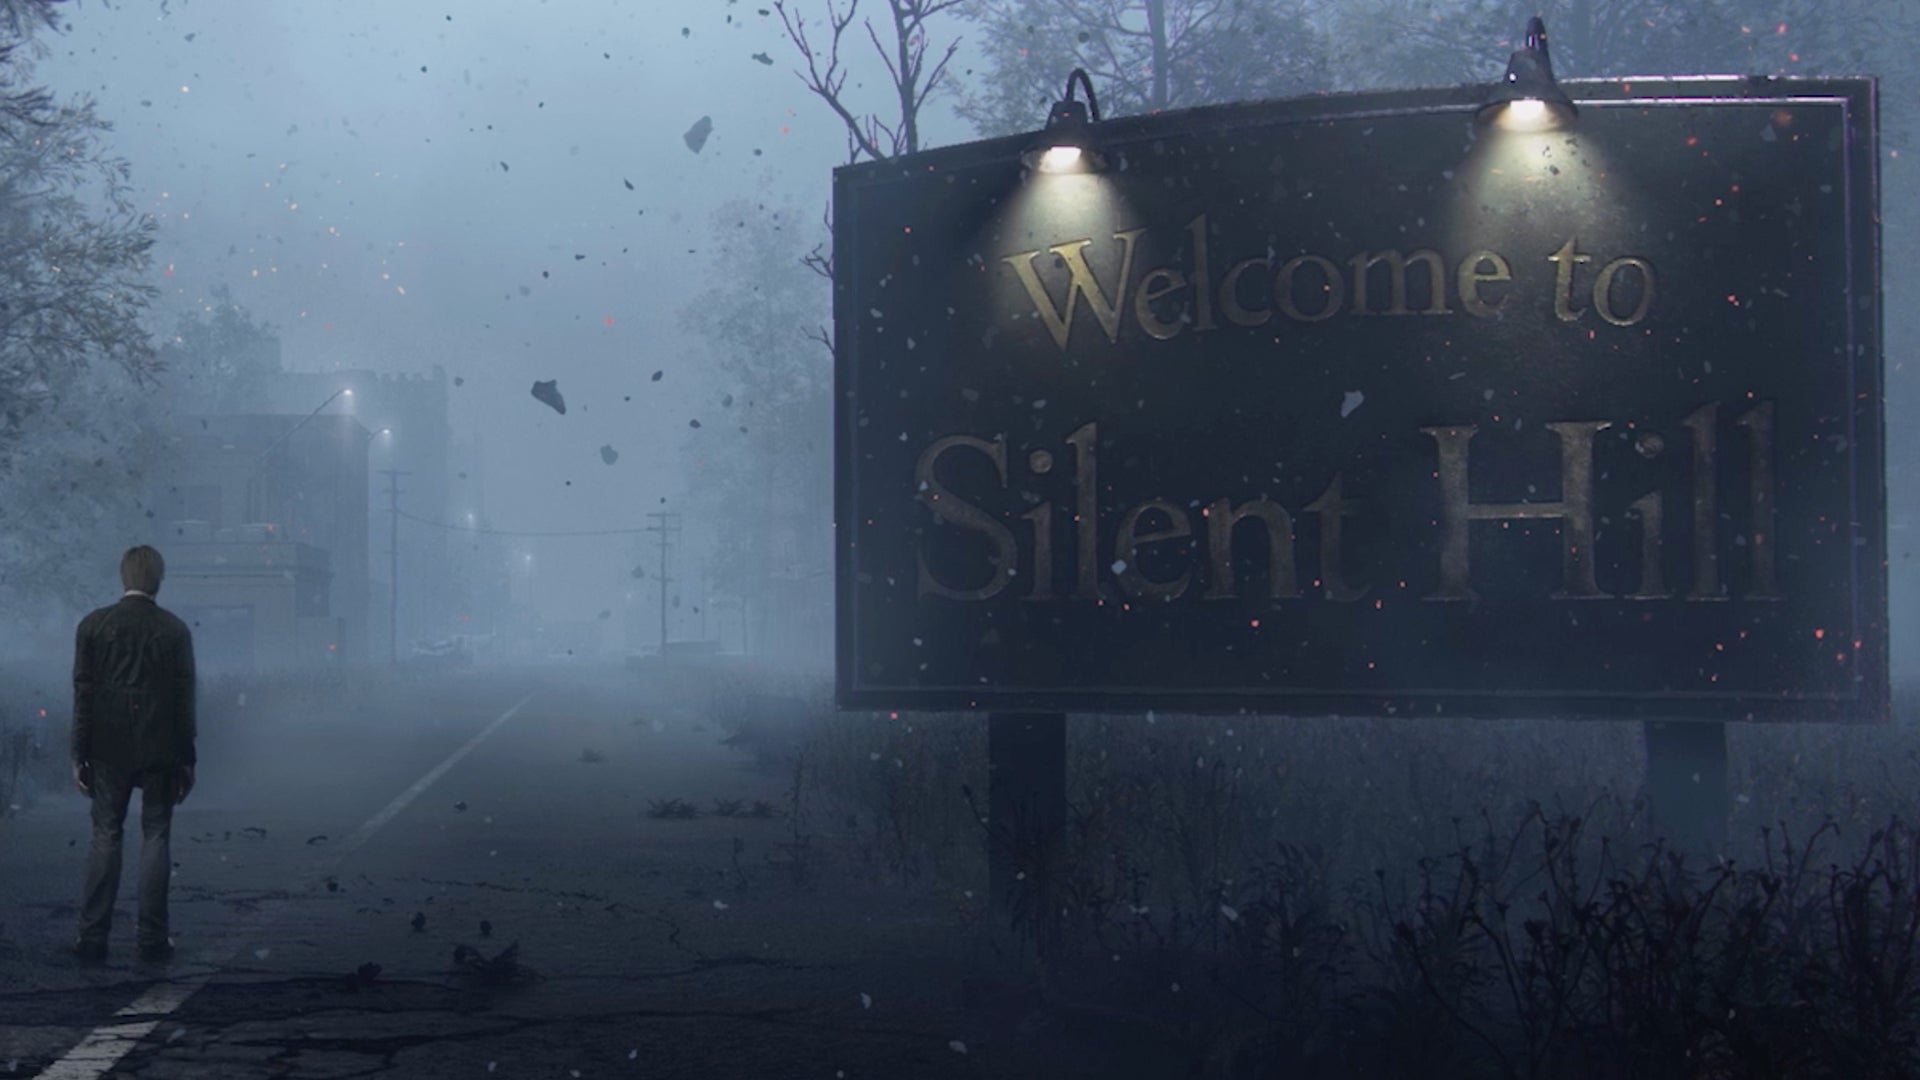 Return to Silent Hill: New Movie from Original Silent Hill Director Confirmed